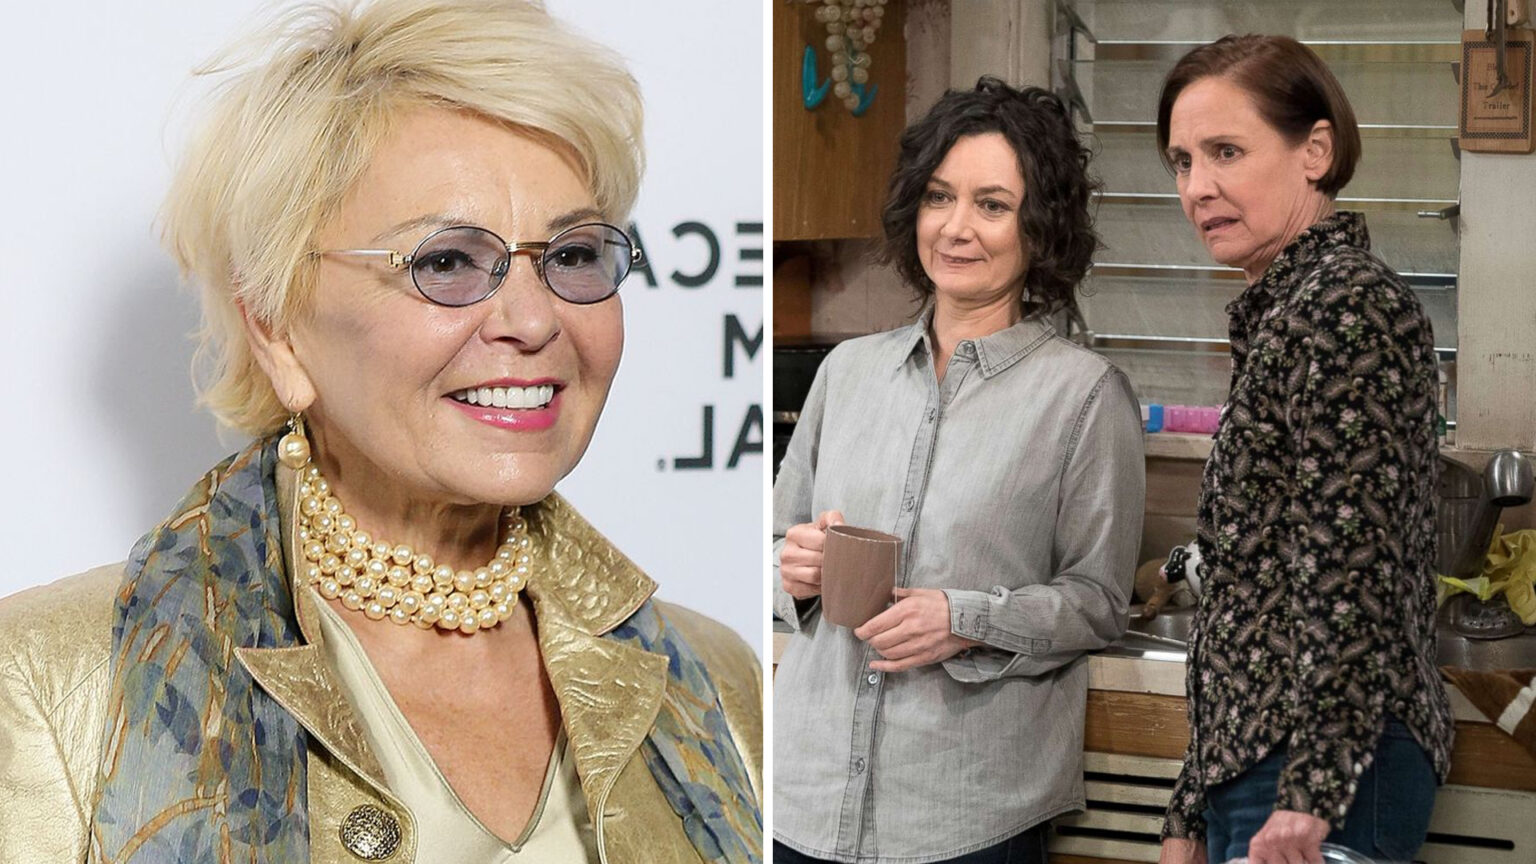 Breaking: Roseanne’s New CBS Show Surpasses “The Conners” with Over 1 Billion Views